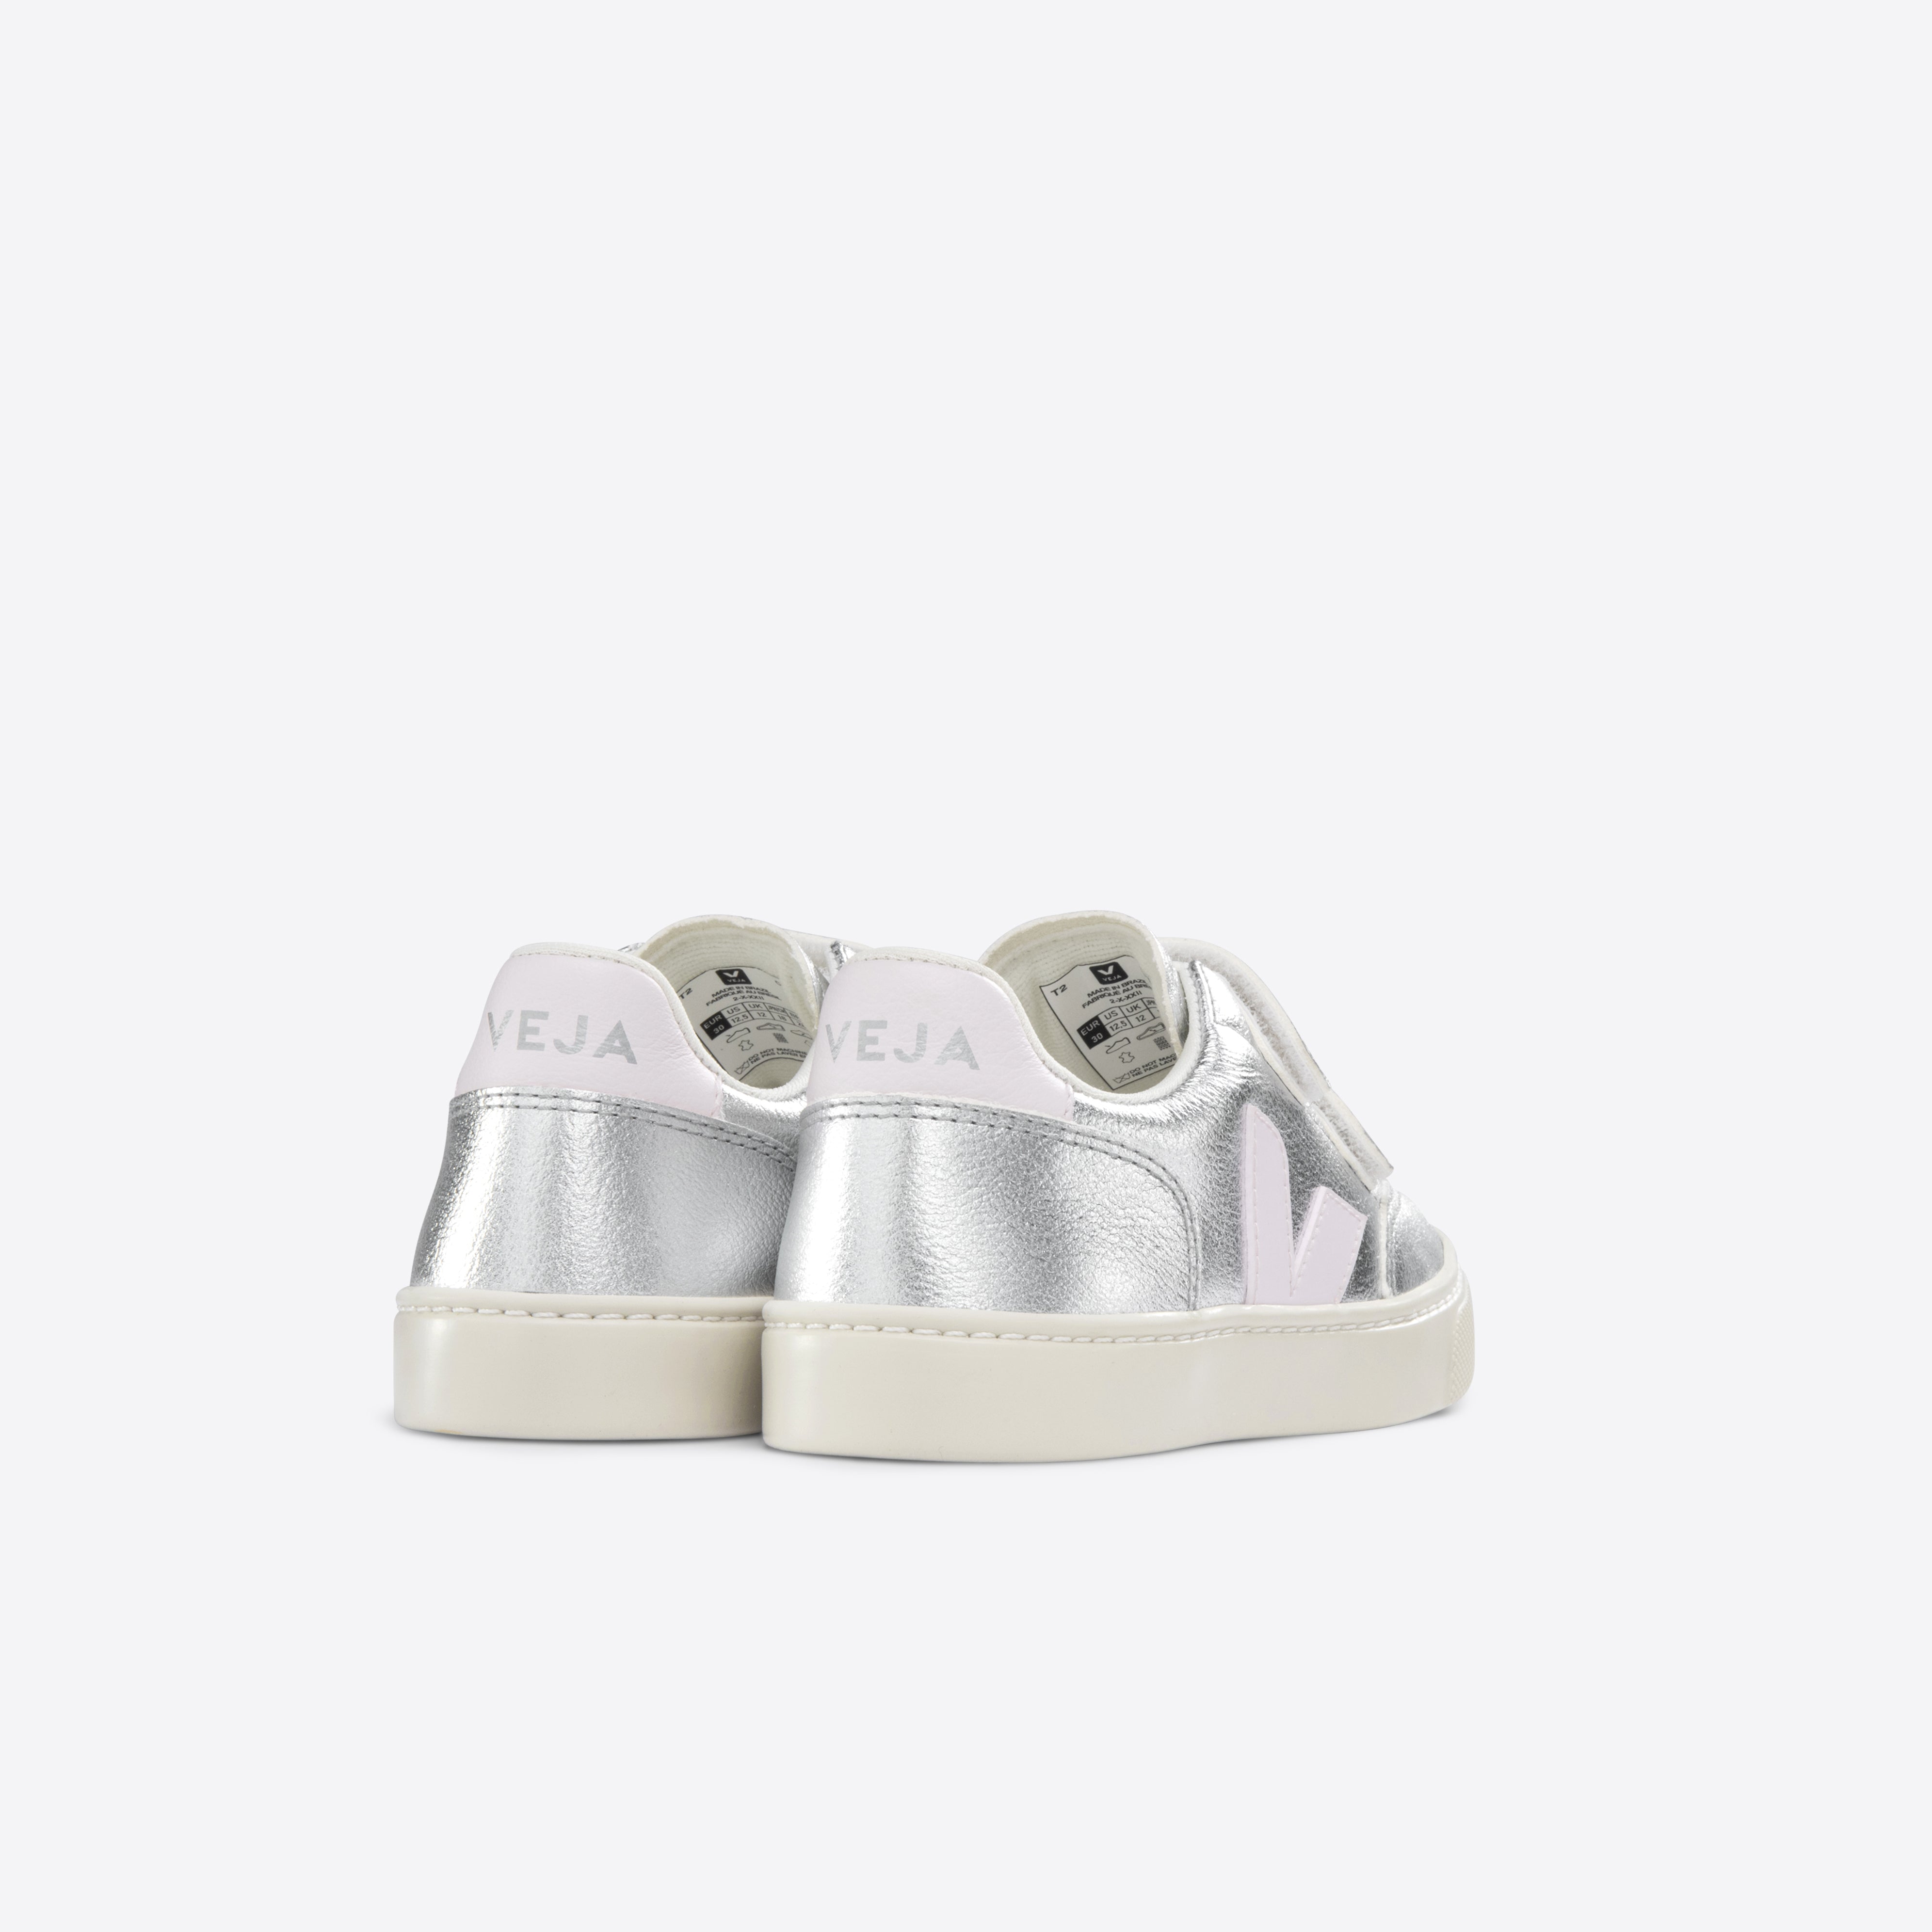 Boys & Girls Silver "SMALL V-12" Shoes